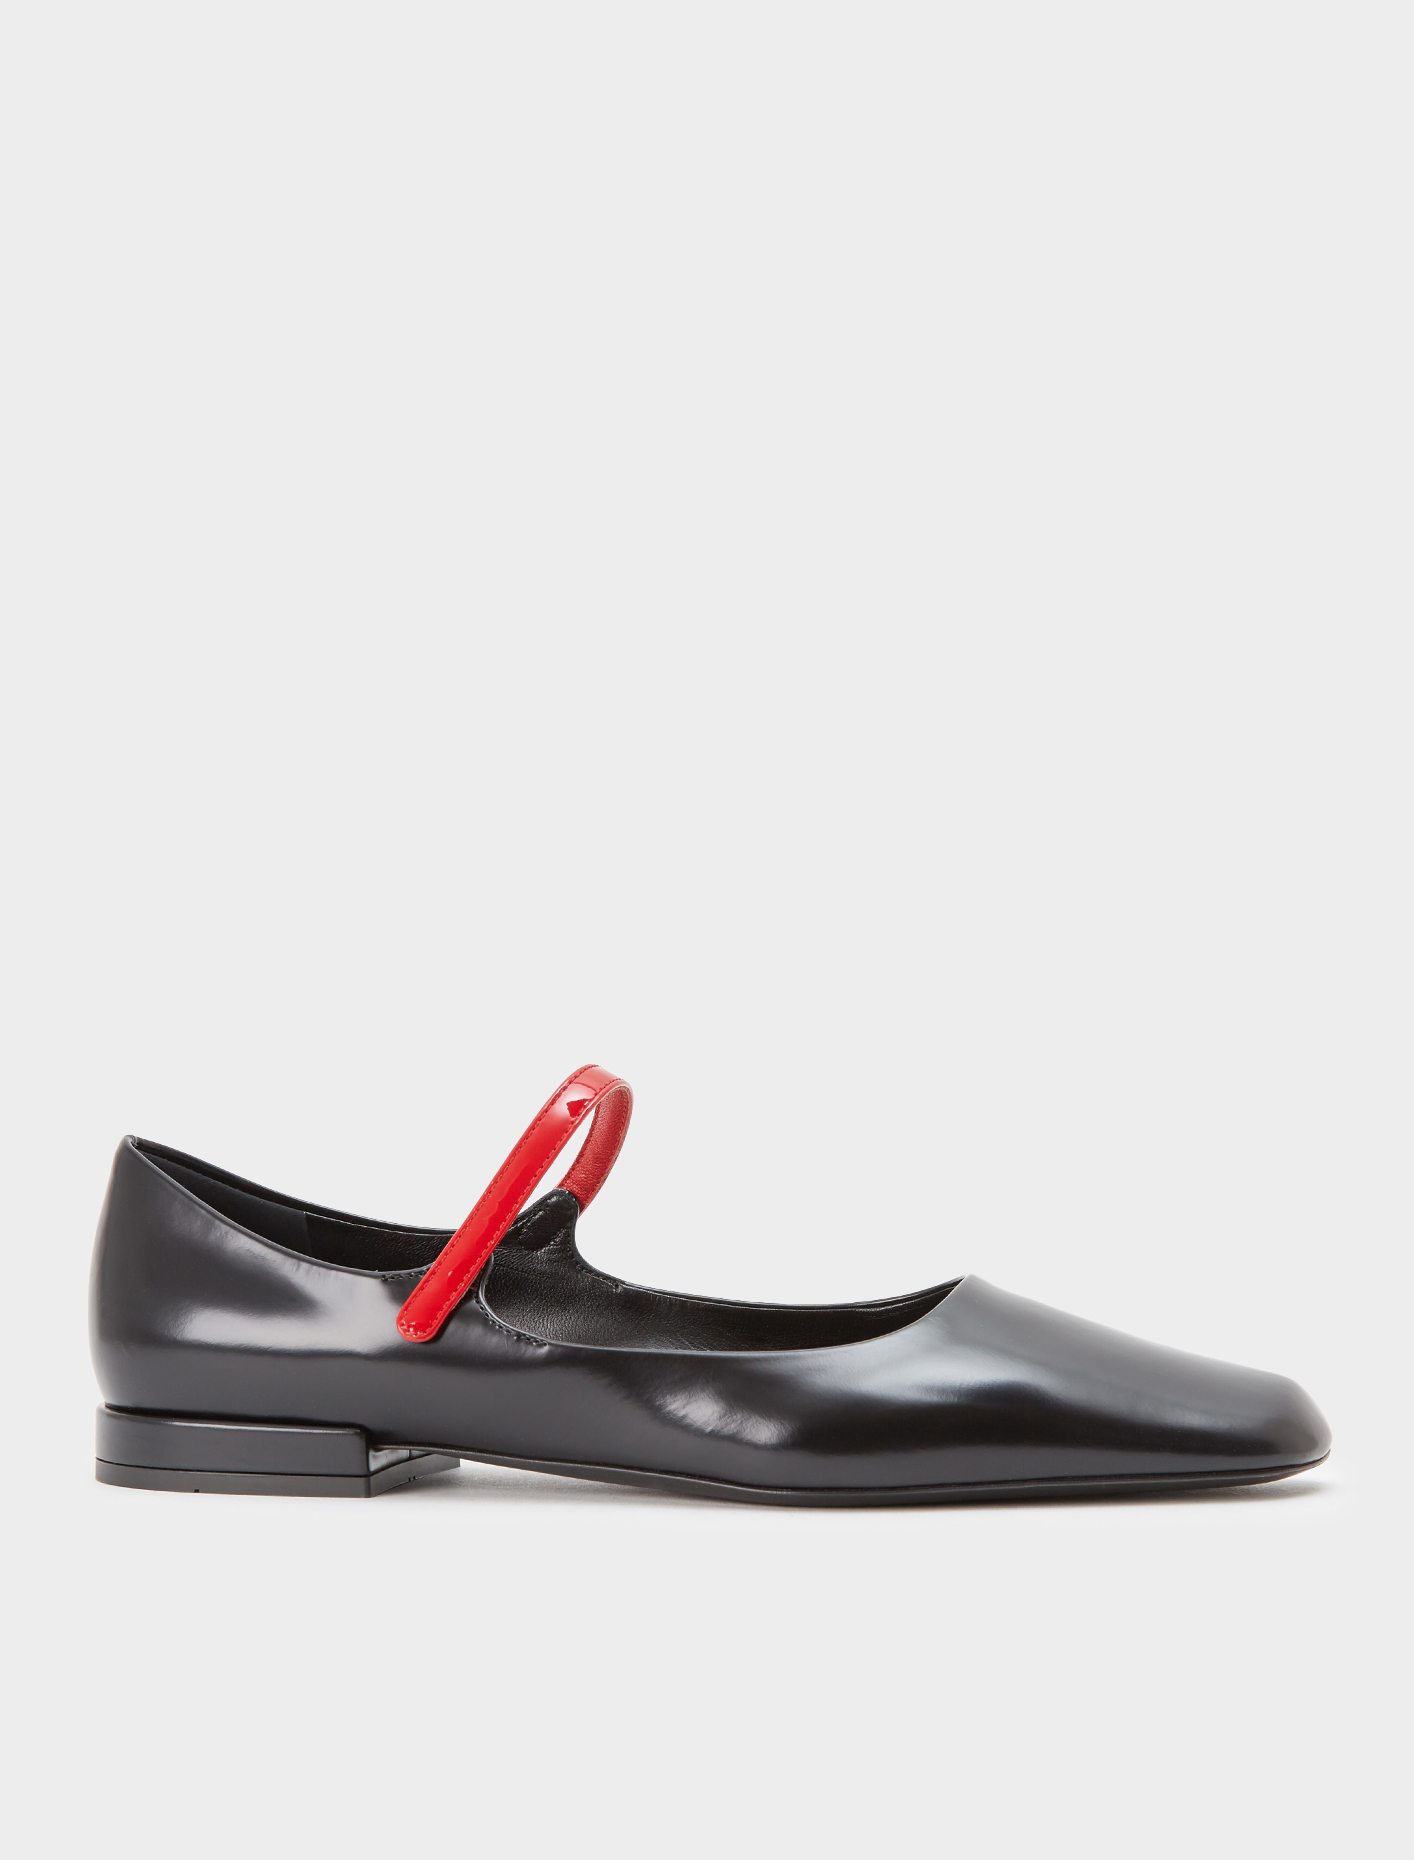 Prada Brushed Leather Ballet Flat with Red Strap | Voo Store Berlin ...